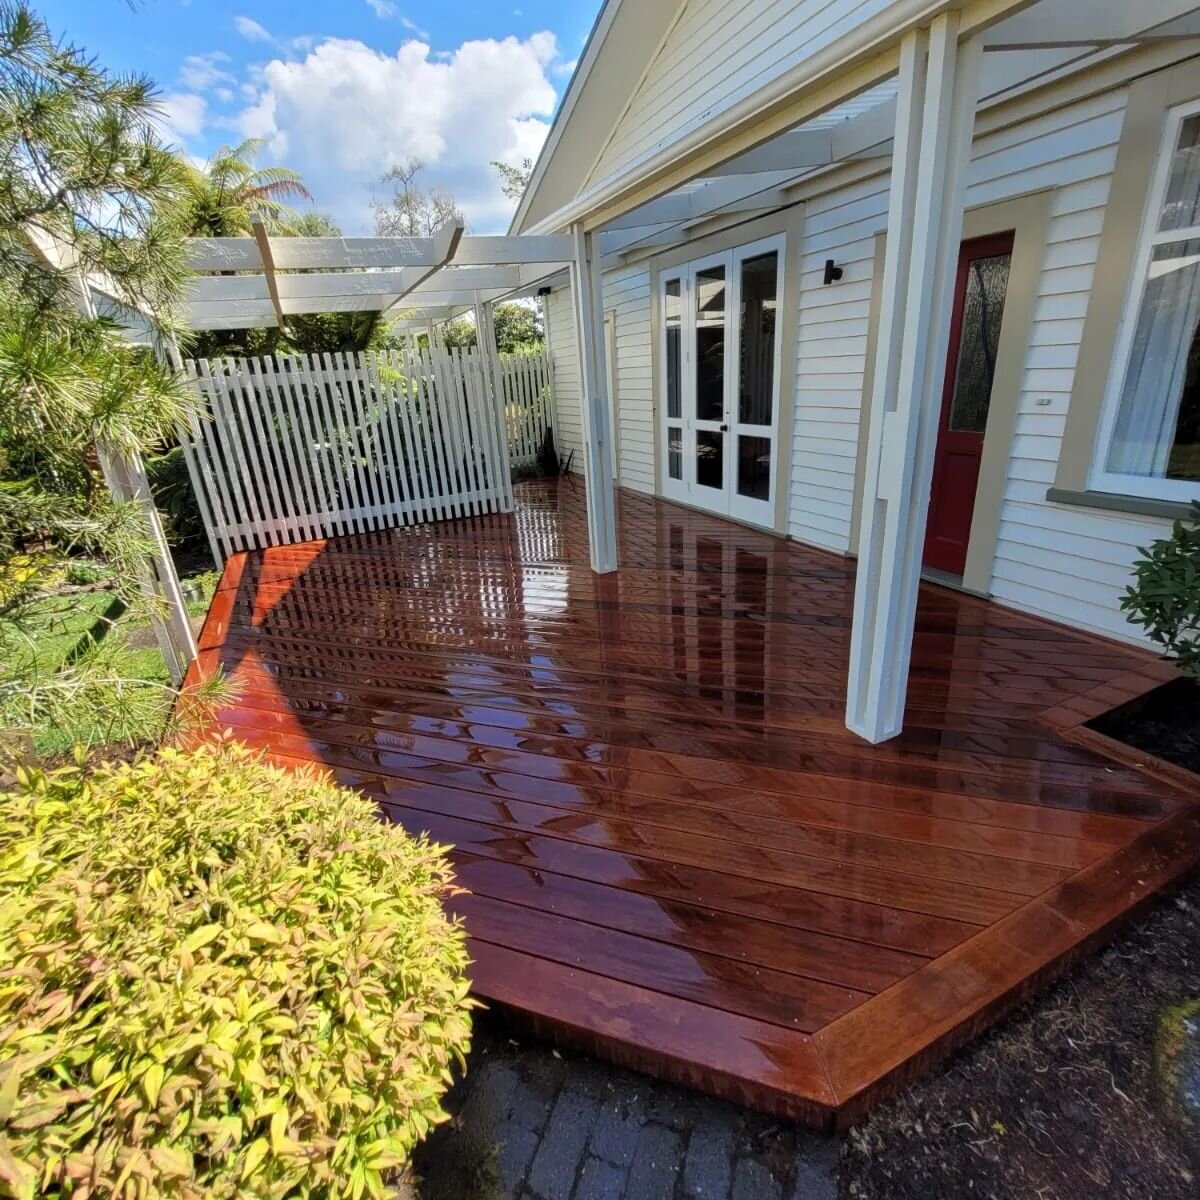 Do you have a deck that needs a new top? This lovely home had 3 sad decks, with boards that had been changed over the years.  We took the  old top off, add in a wee bit of new framing. Can't put the goods on stuffed wood. What a difference!!! 

#smal